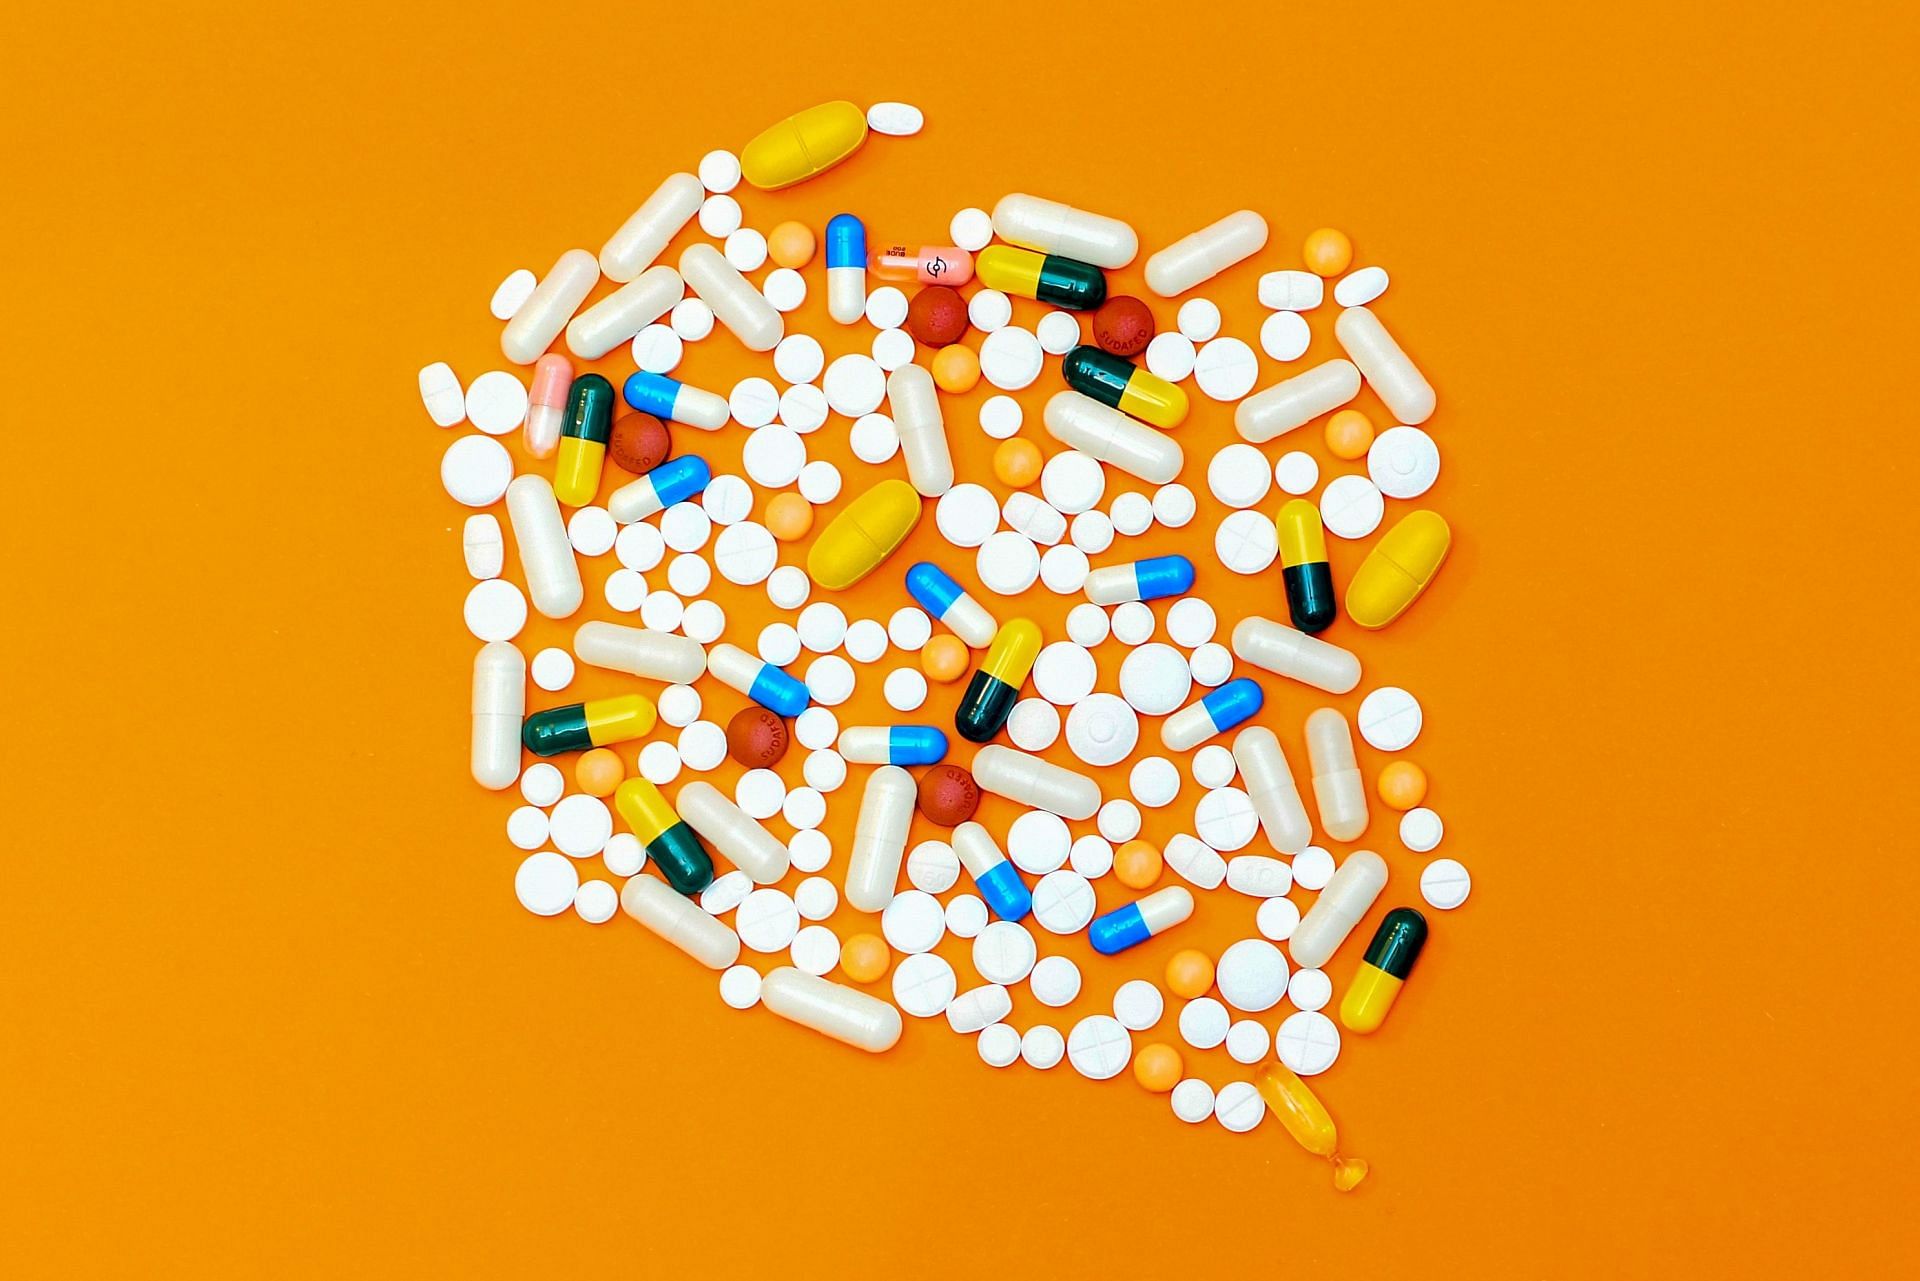 Consult your doctor before consuming these pills. (Image via unsplash / michal parzuchowski)